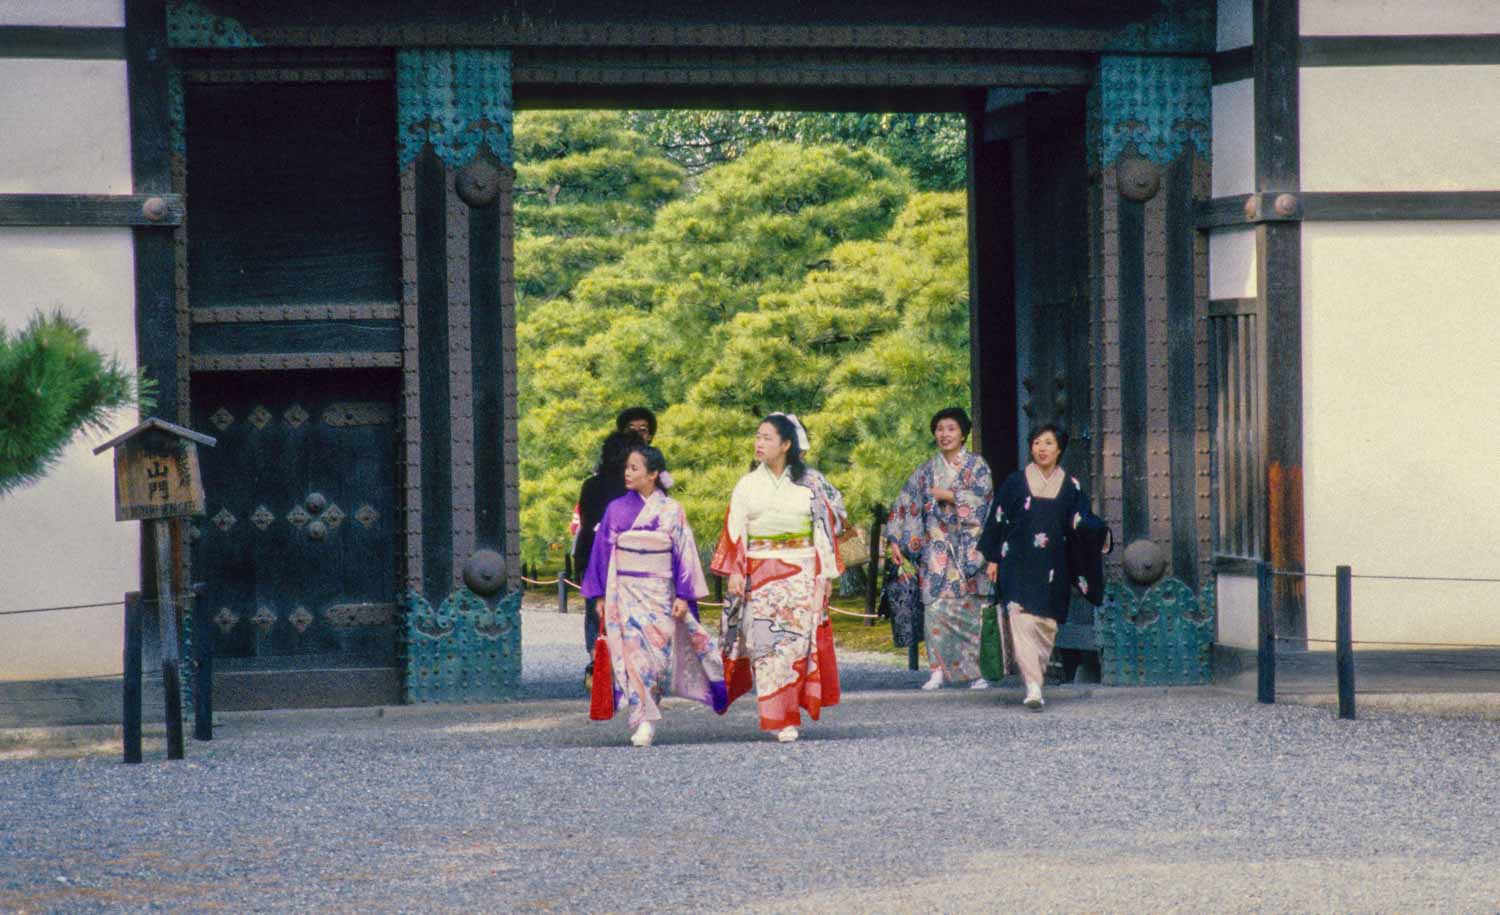 Women enter Imperial Palace grounds in Kyoto